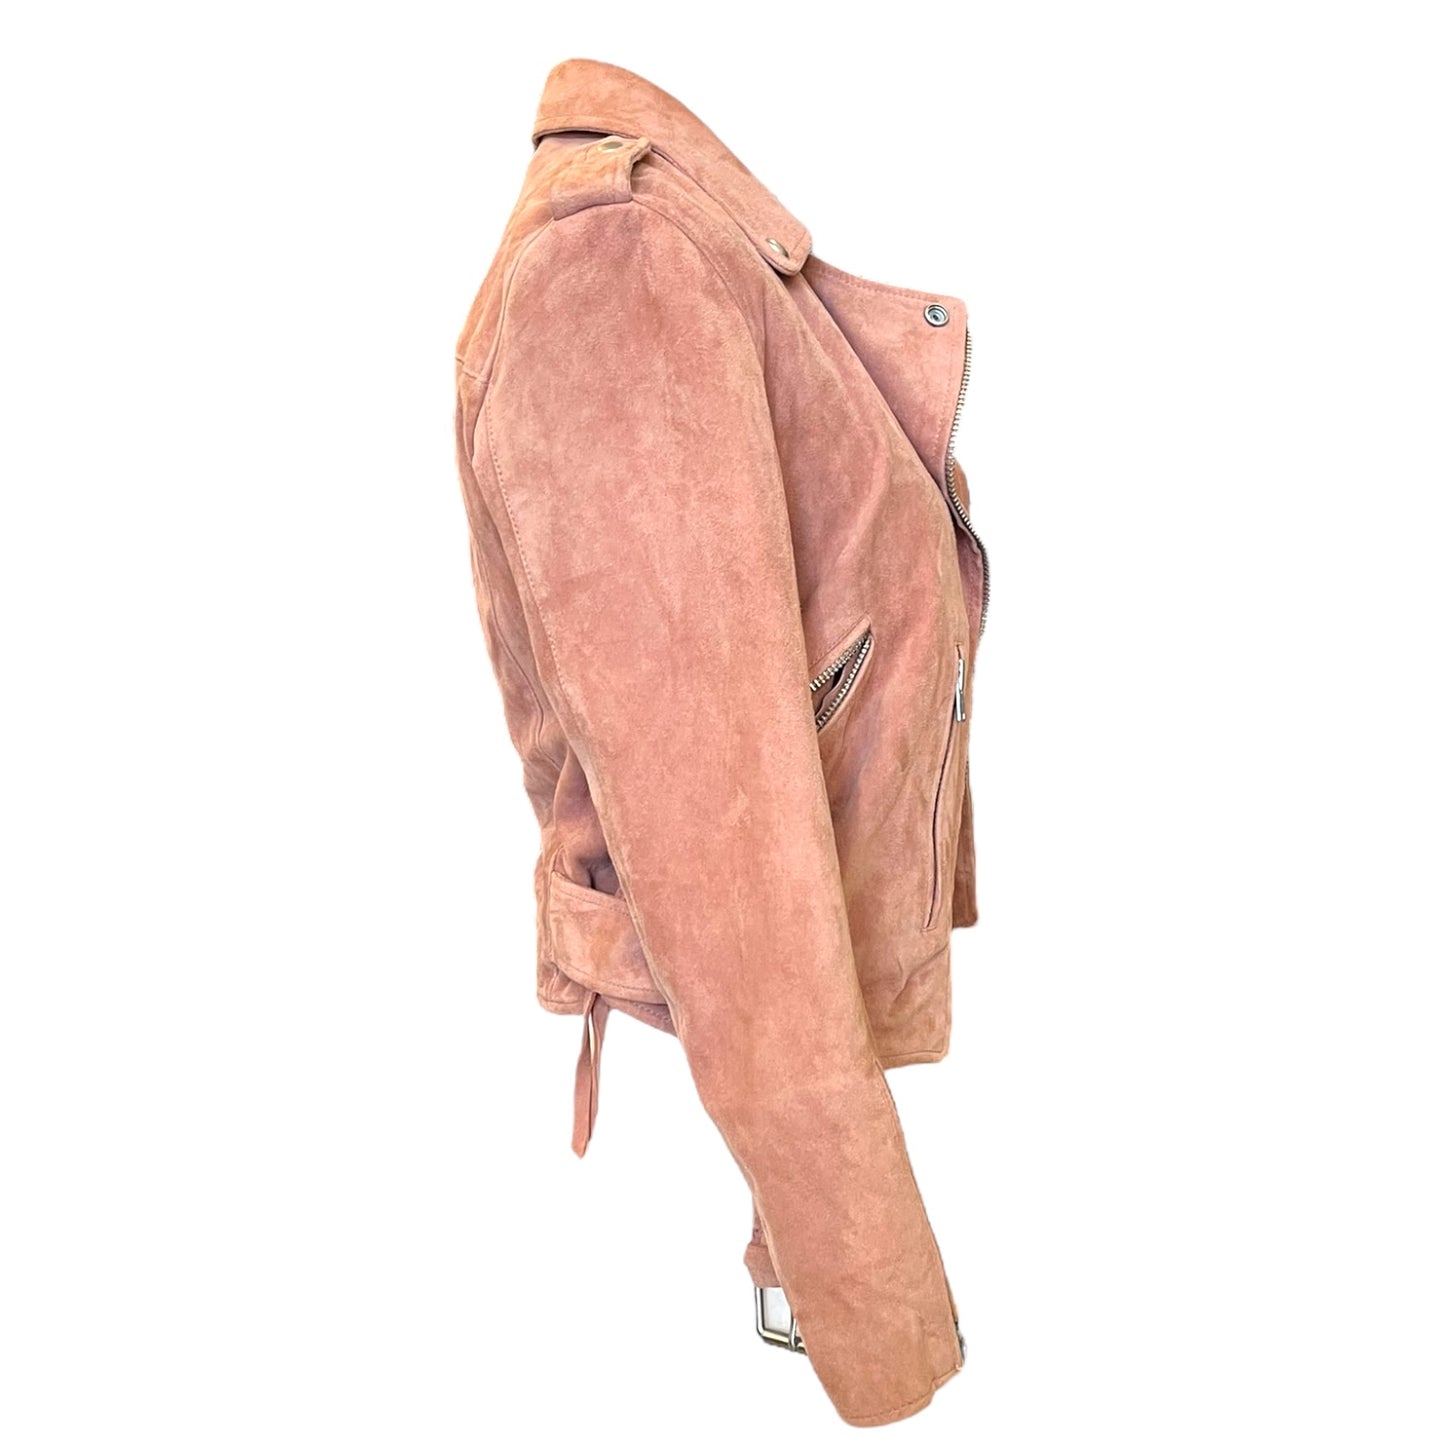 All Saints Dusty Pink Suede Jacket